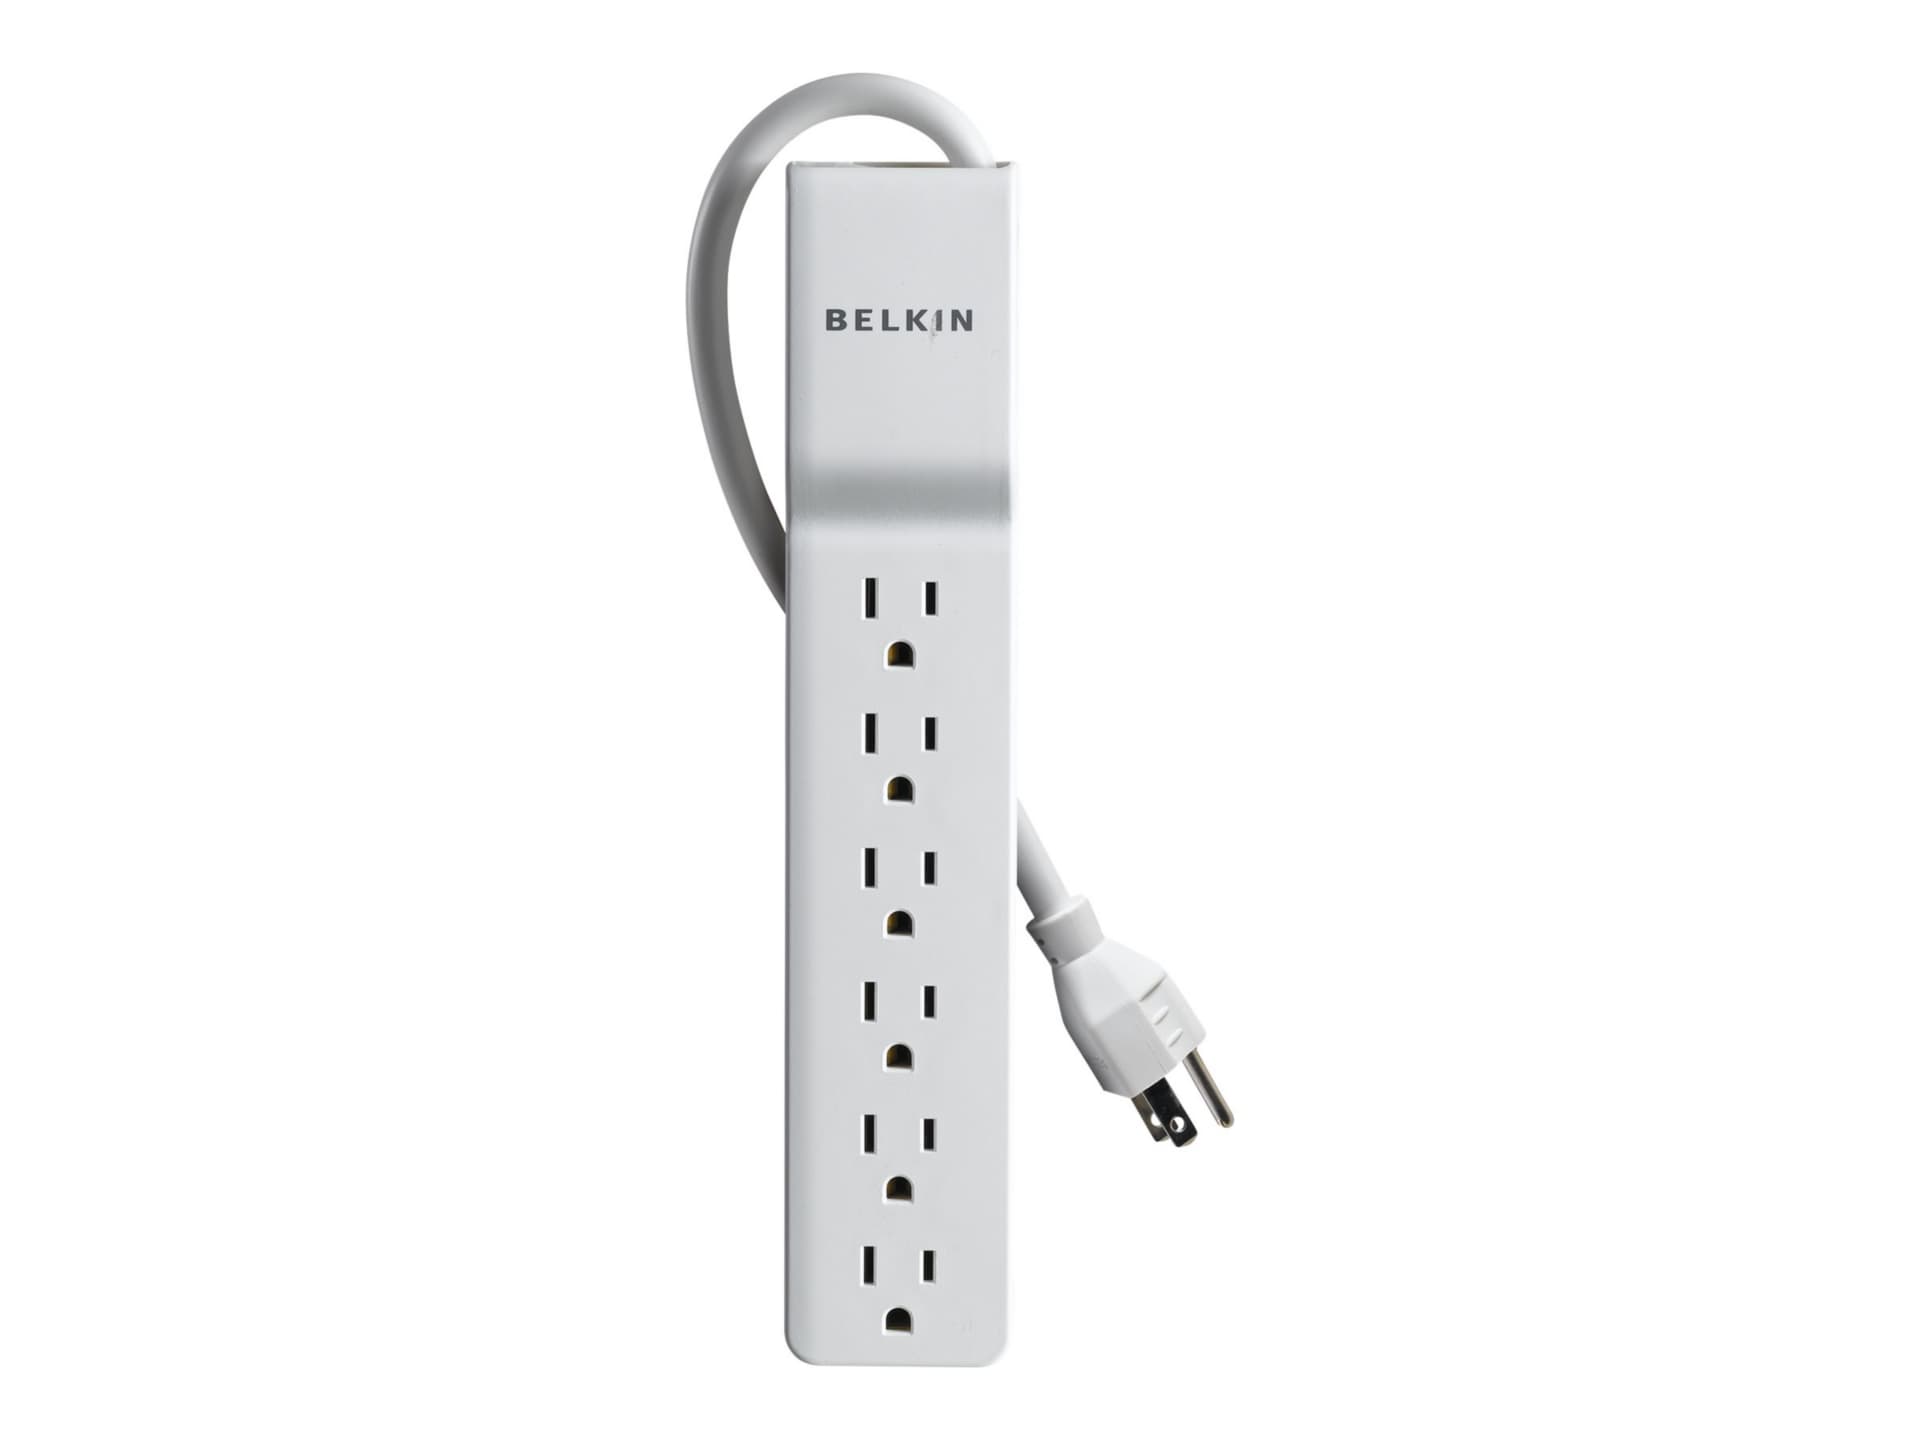 Belkin 6 Outlet Home and Office Power Strip Surge Protector with 4ft Power Cord - 720 Joules - 1875 Watts